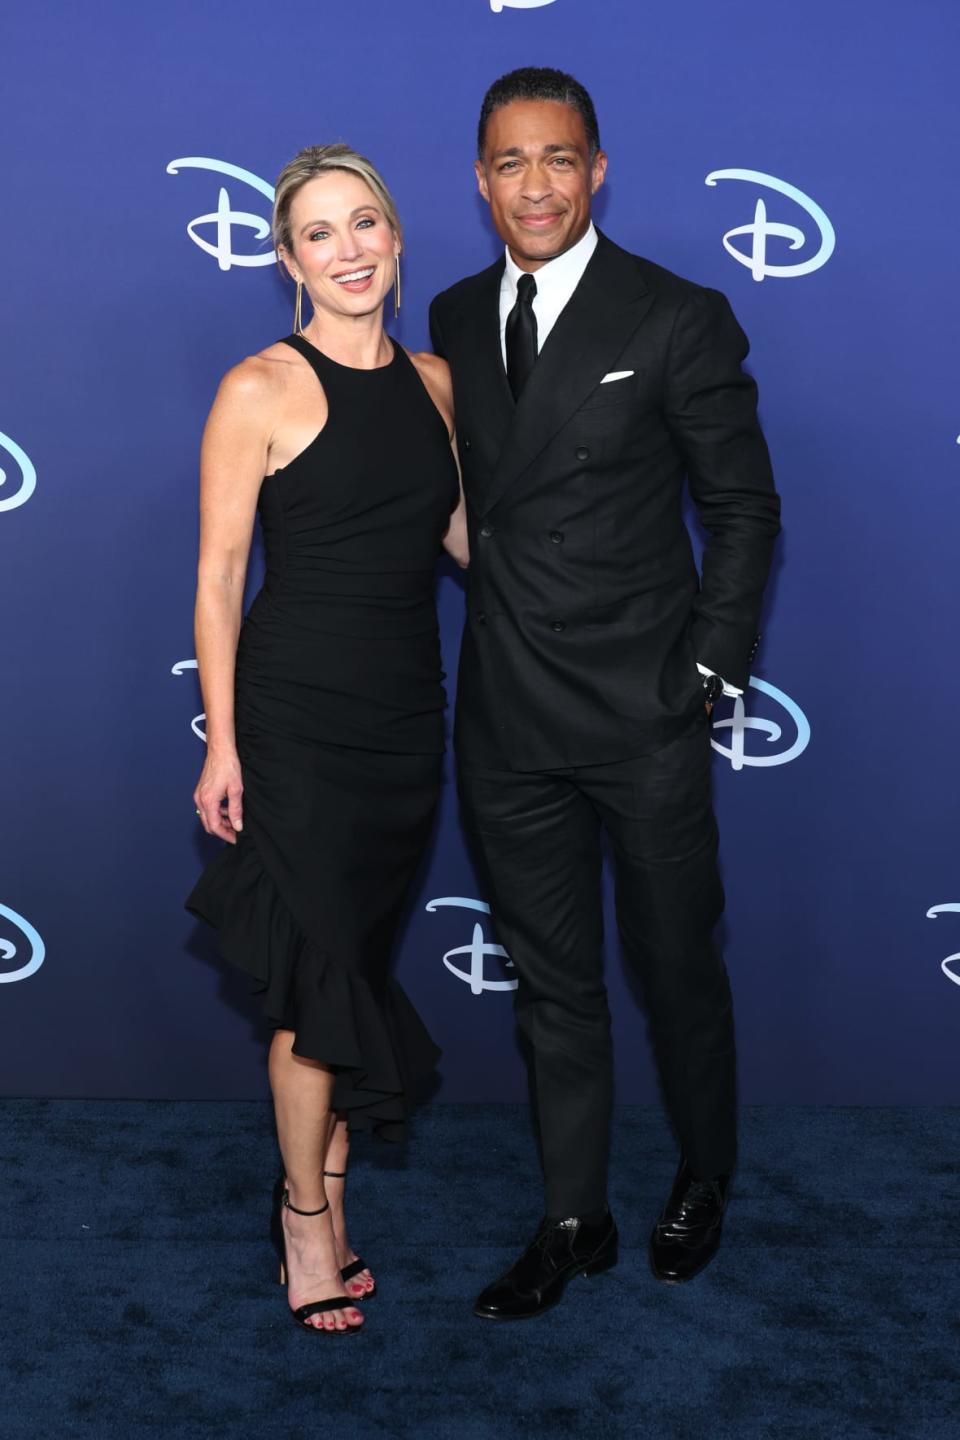 NEW YORK, NEW YORK – MAY 17: Amy Robach and TJ Holmes attend the 2022 ABC Disney Upfront at Basketball City – Pier 36 – South Street on May 17, 2022 in New York City. (Photo by Dia Dipasupil/Getty Images,)